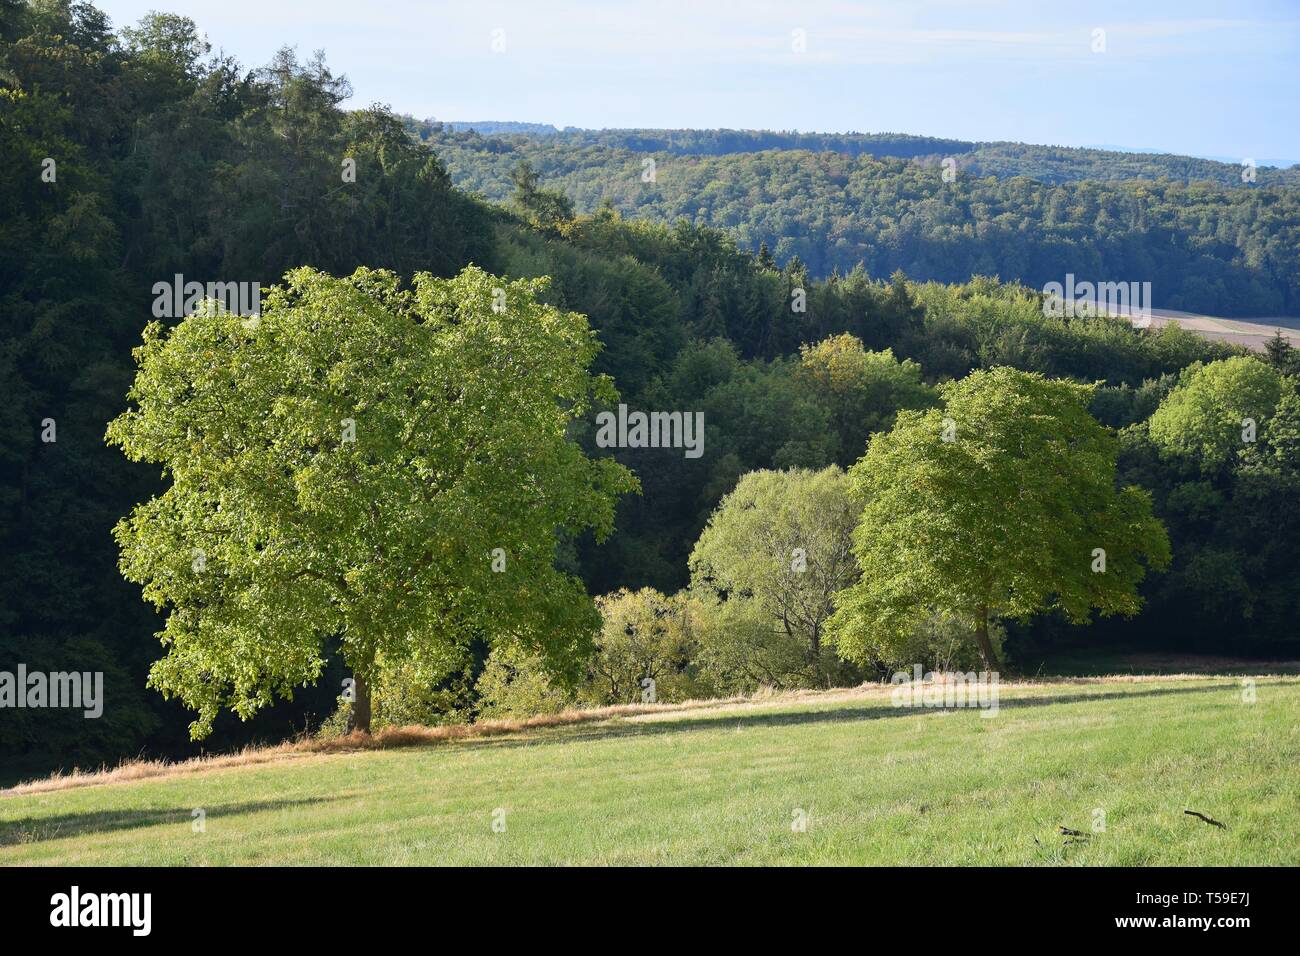 A landscape with walnut trees and forest. Fischbachtal, Odenwald, Germany. Stock Photo